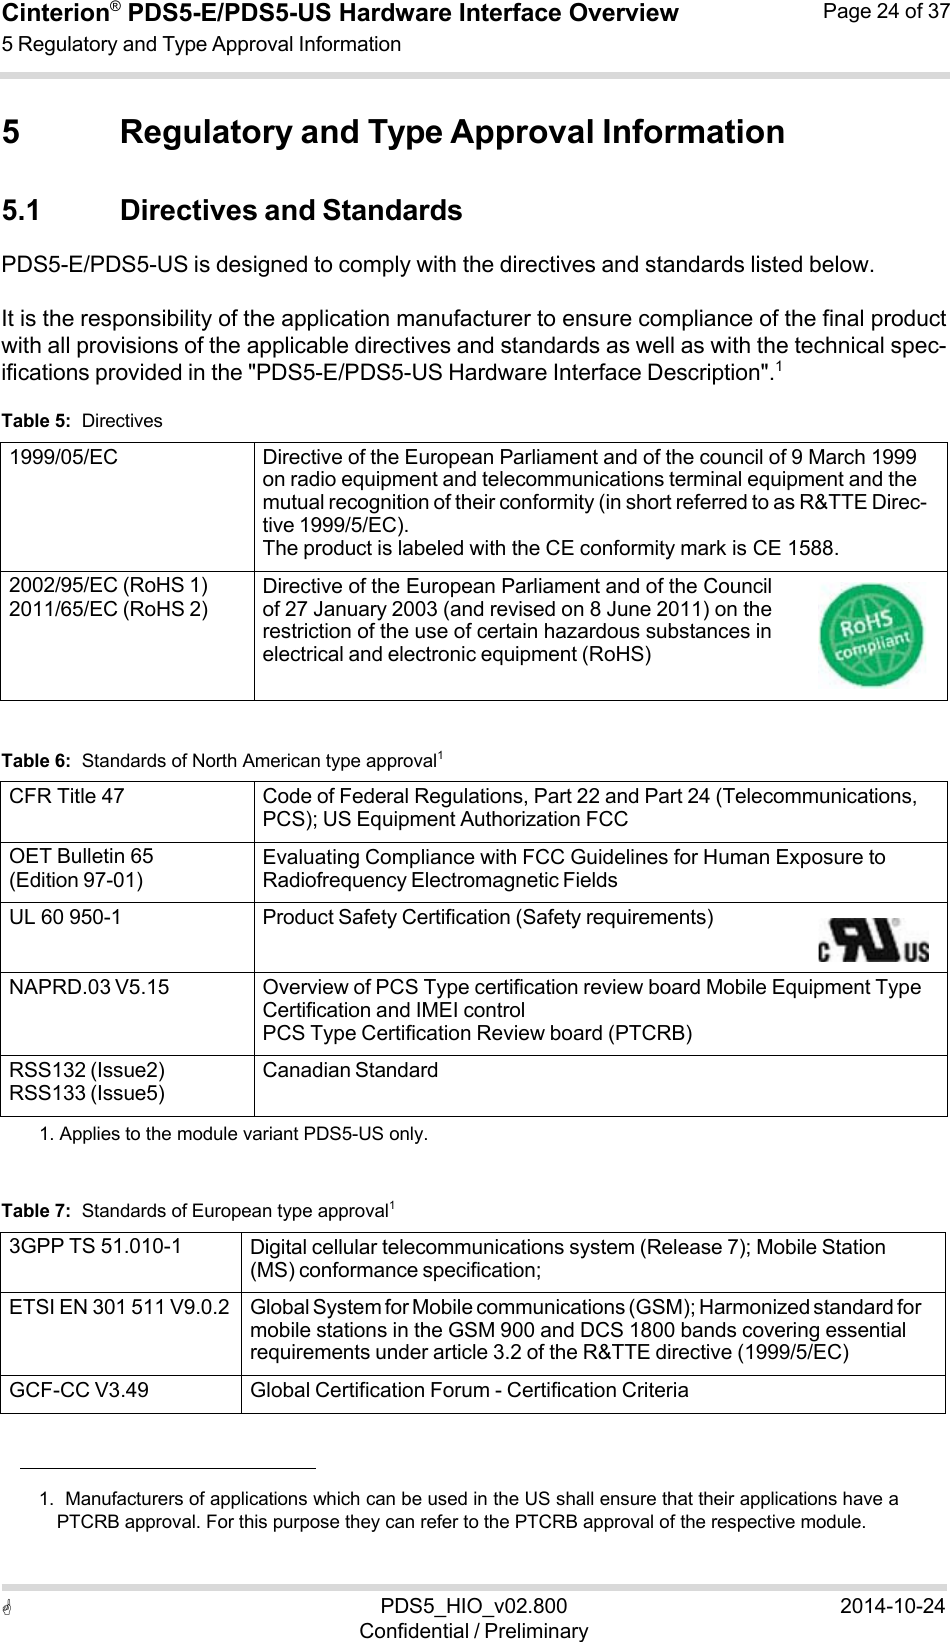 Cinterion®  PDS5-E/PDS5-US Hardware Interface Overview5 Regulatory and Type Approval Information Page 24 of 37 PDS5_HIO_v02.800Confidential / Preliminary2014-10-24   5 Regulatory and Type Approval Information  5.1 Directives and Standards PDS5-E/PDS5-US is designed to comply with the directives and standards listed below.  It is the responsibility of the application manufacturer to ensure compliance of the final product with all provisions of the applicable directives and standards as well as with the technical spec- ifications provided in the &quot;PDS5-E/PDS5-US Hardware Interface Description&quot;.1  Table 5:  Directives  1999/05/EC Directive of the European Parliament and of the council of 9 March 1999 on radio equipment and telecommunications terminal equipment and the mutual recognition of their conformity (in short referred to as R&amp;TTE Direc- tive 1999/5/EC). The product is labeled with the CE conformity mark is CE 1588. 2002/95/EC (RoHS 1) 2011/65/EC (RoHS 2) Directive of the European Parliament and of the Council of 27 January 2003 (and revised on 8 June 2011) on the restriction of the use of certain hazardous substances in electrical and electronic equipment (RoHS)   Table 6:  Standards of North American type approval1  CFR Title 47 Code of Federal Regulations, Part 22 and Part 24 (Telecommunications, PCS); US Equipment Authorization FCC OET Bulletin 65 (Edition 97-01) Evaluating Compliance with FCC Guidelines for Human Exposure to Radiofrequency Electromagnetic Fields UL 60 950-1 Product Safety Certification (Safety requirements)NAPRD.03 V5.15 Overview of PCS Type certification review board Mobile Equipment Type Certification and IMEI control PCS Type Certification Review board (PTCRB) RSS132 (Issue2) RSS133 (Issue5) Canadian Standard1. Applies to the module variant PDS5-US only.   Table 7:  Standards of European type approval1  3GPP TS 51.010-1 Digital cellular telecommunications system (Release 7); Mobile Station (MS) conformance specification; ETSI EN 301 511 V9.0.2 Global System for Mobile communications (GSM); Harmonized standard for mobile stations in the GSM 900 and DCS 1800 bands covering essential requirements under article 3.2 of the R&amp;TTE directive (1999/5/EC) GCF-CC V3.49 Global Certification Forum - Certification Criteria    1.  Manufacturers of applications which can be used in the US shall ensure that their applications have a PTCRB approval. For this purpose they can refer to the PTCRB approval of the respective module. 